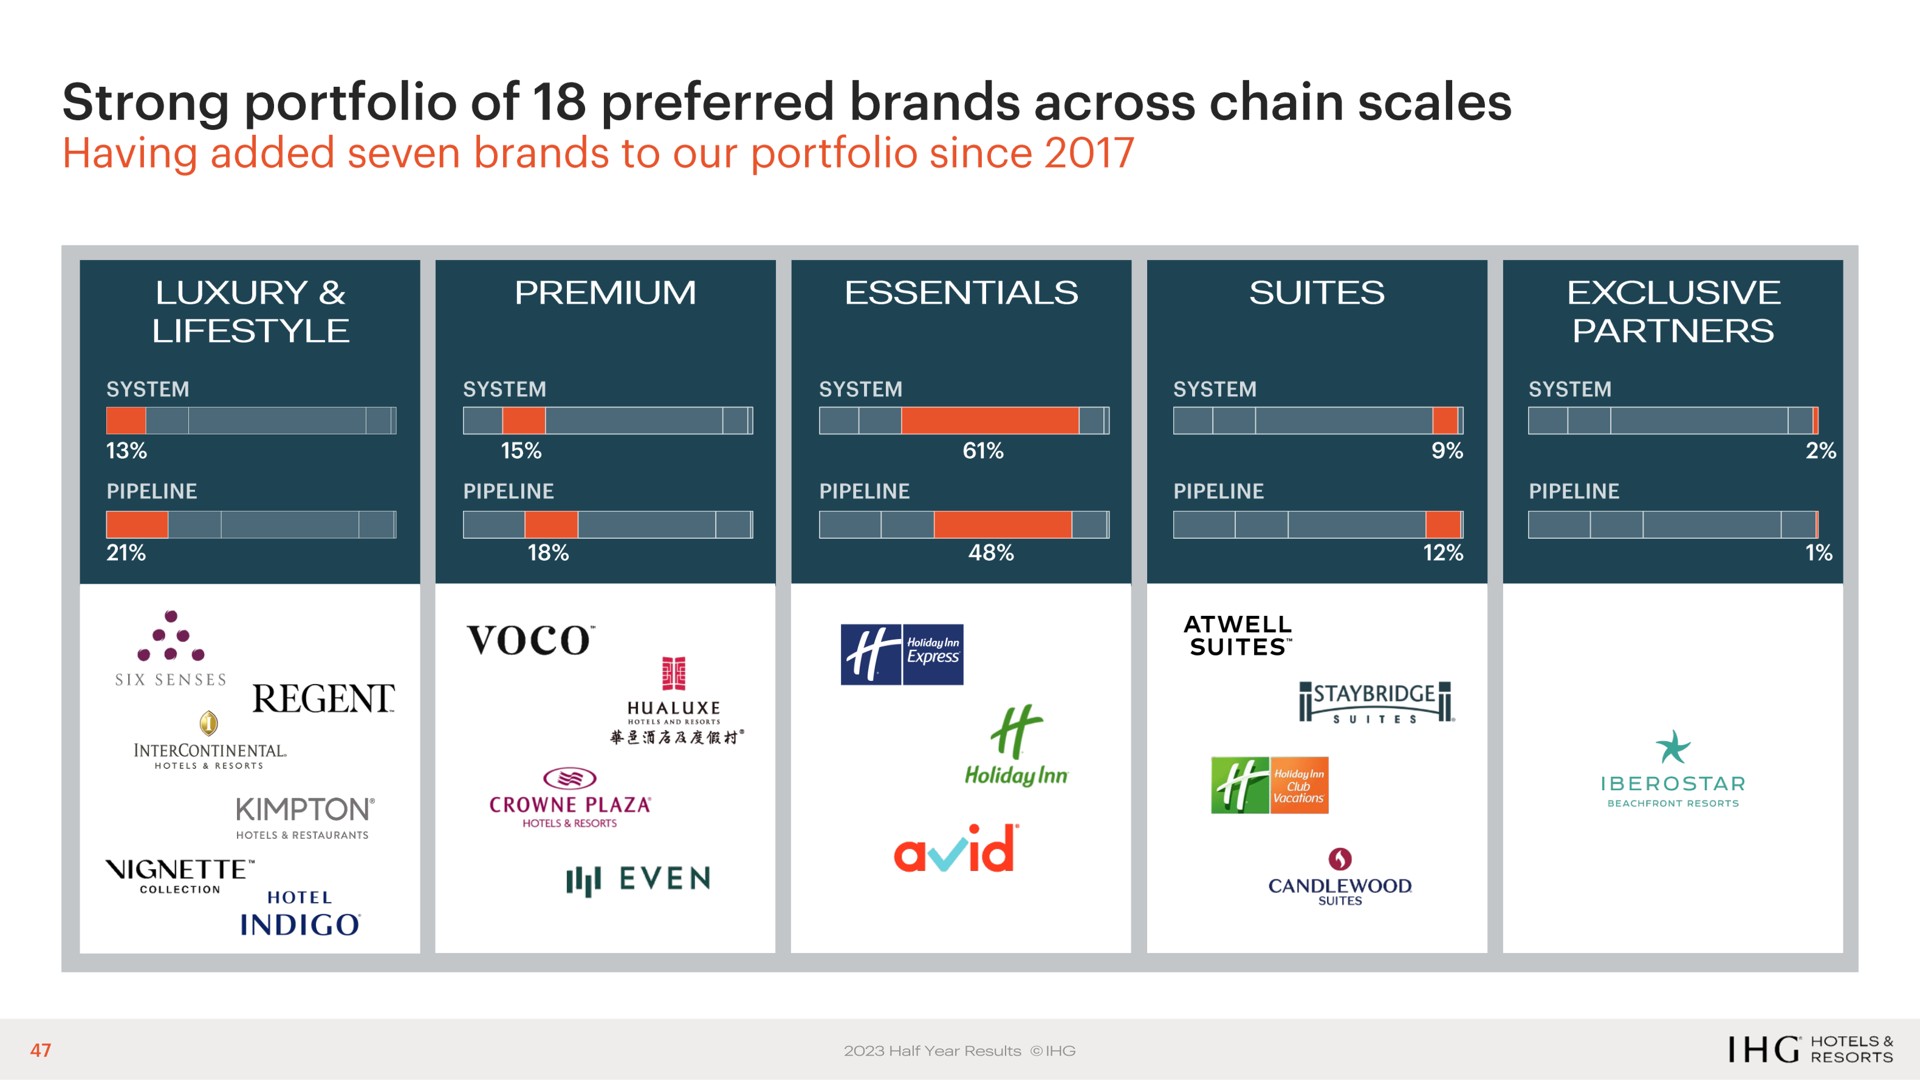 strong portfolio of preferred brands across chain scales even suites | IHG Hotels